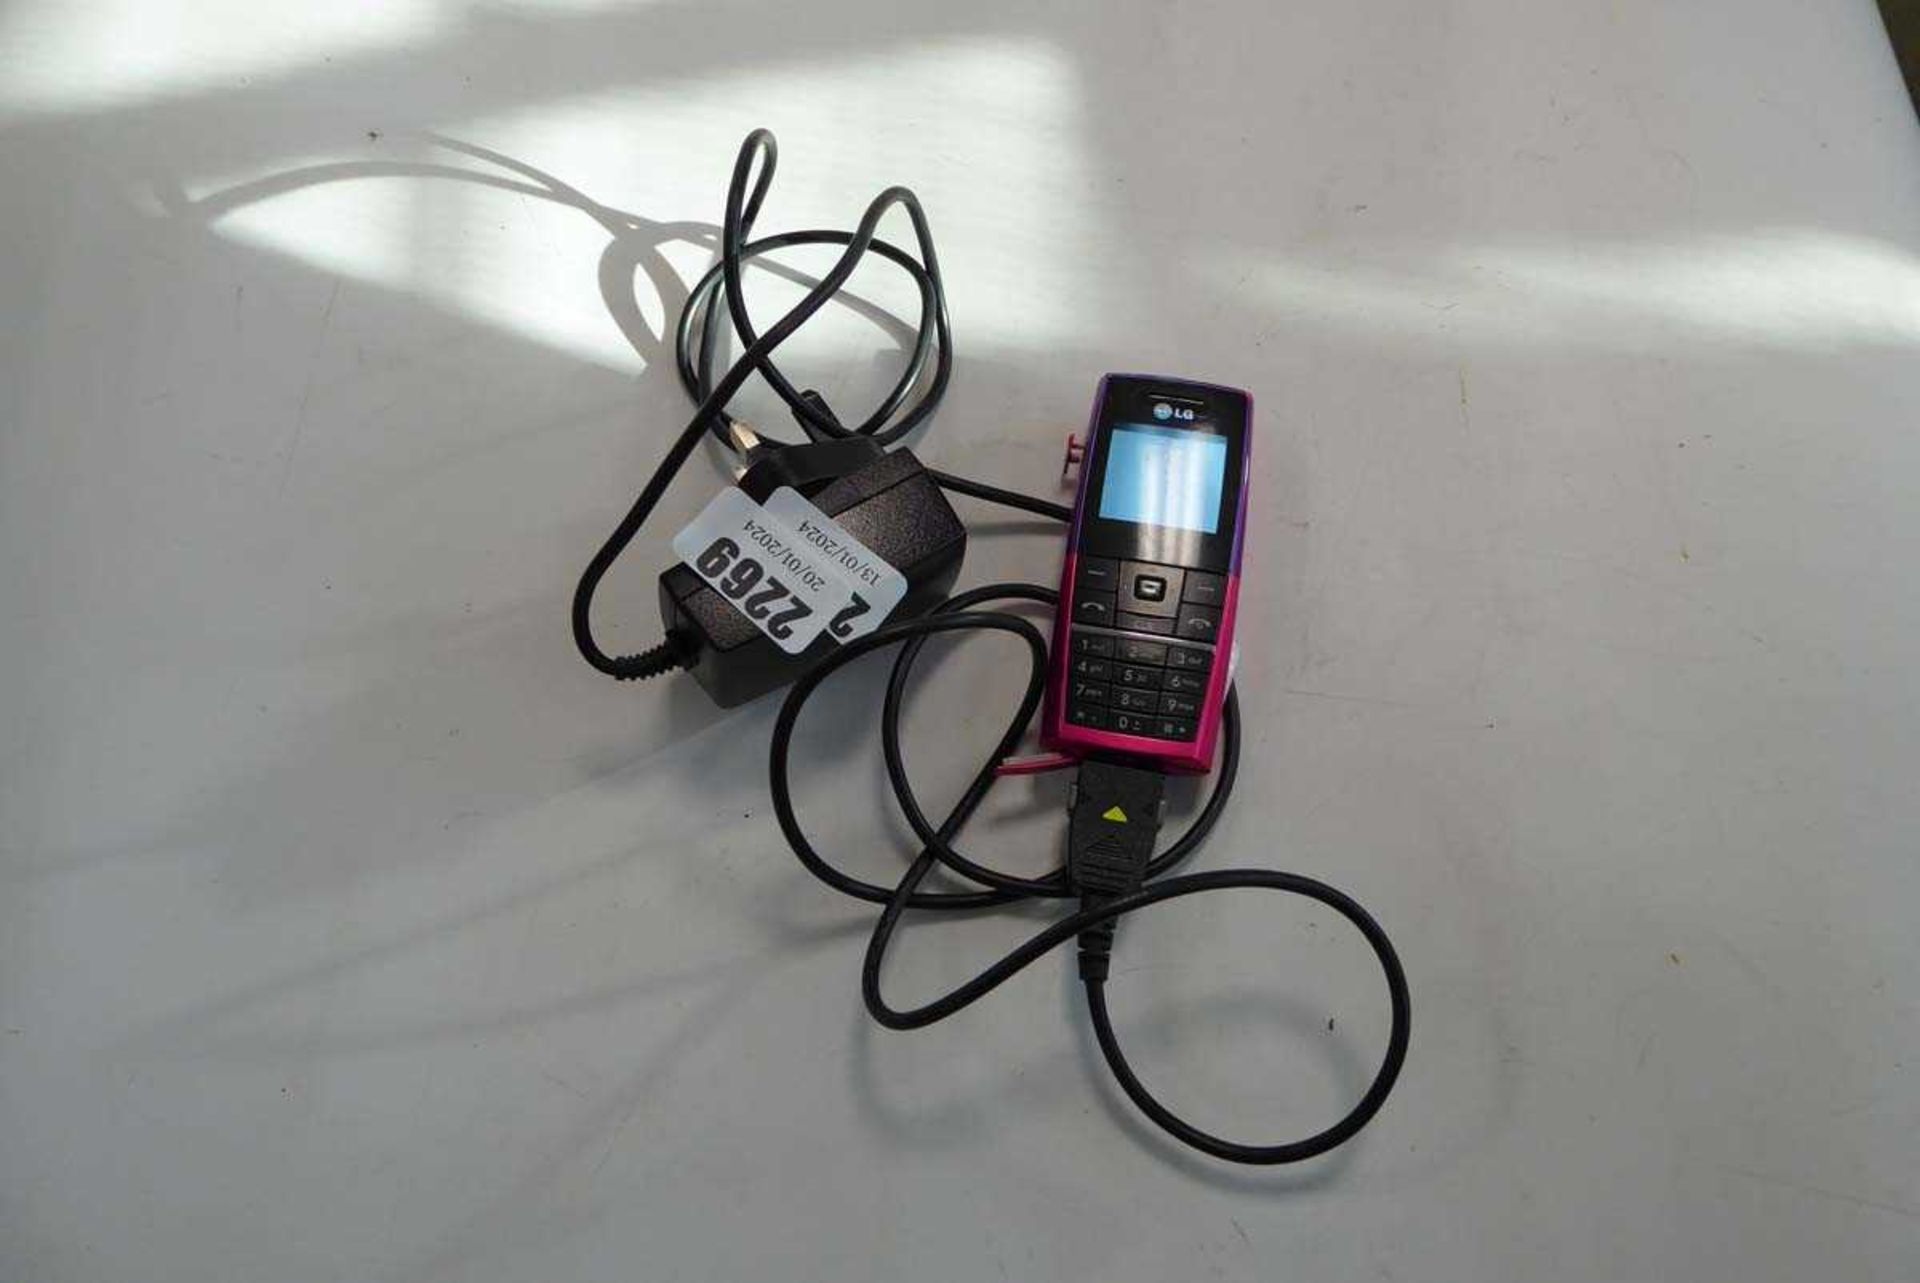 LG mobile phone and charger